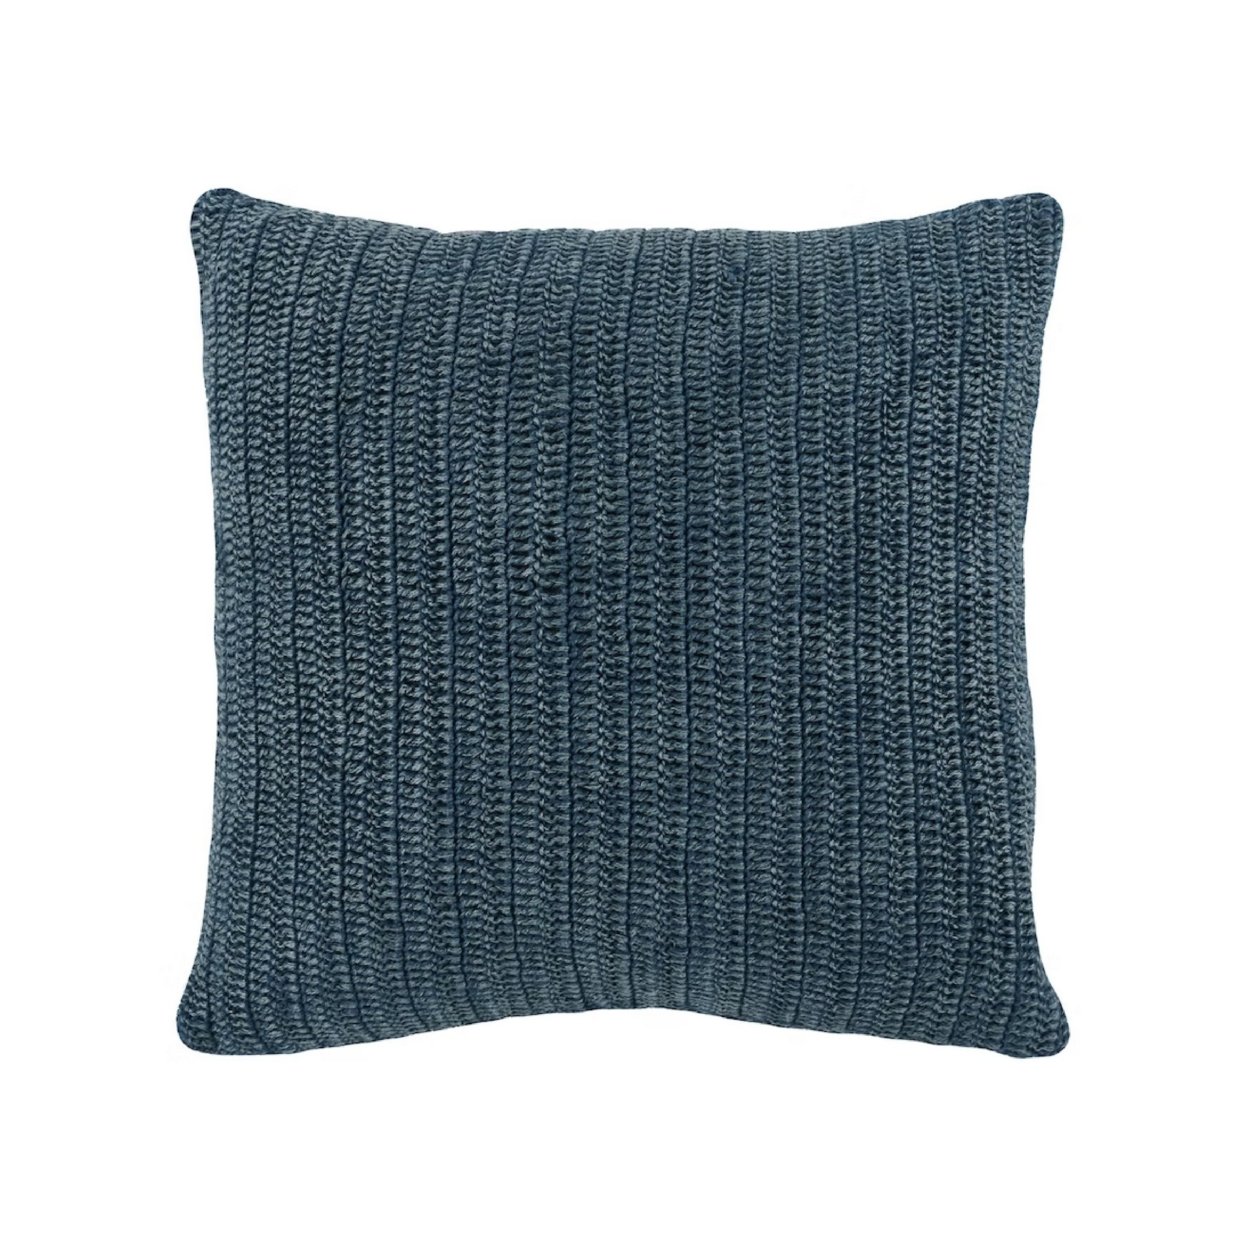 Rosie 22 Inch Square Accent Throw Pillow, Hand Knitted Designs, Blue Linen- Saltoro Sherpi